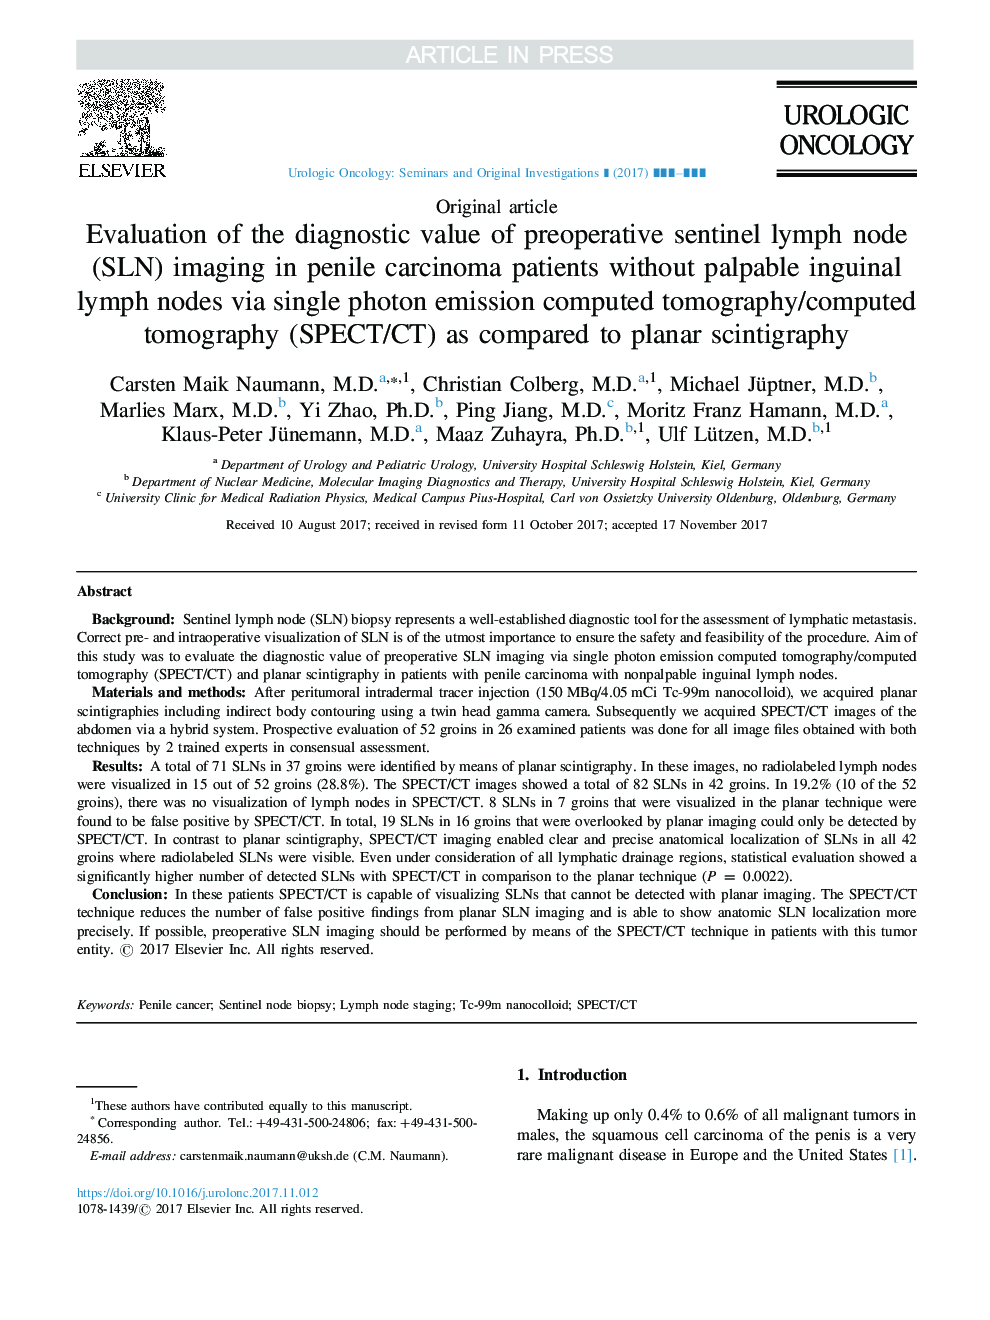 Evaluation of the diagnostic value of preoperative sentinel lymph node (SLN) imaging in penile carcinoma patients without palpable inguinal lymph nodes via single photon emission computed tomography/computed tomography (SPECT/CT) as compared to planar sci